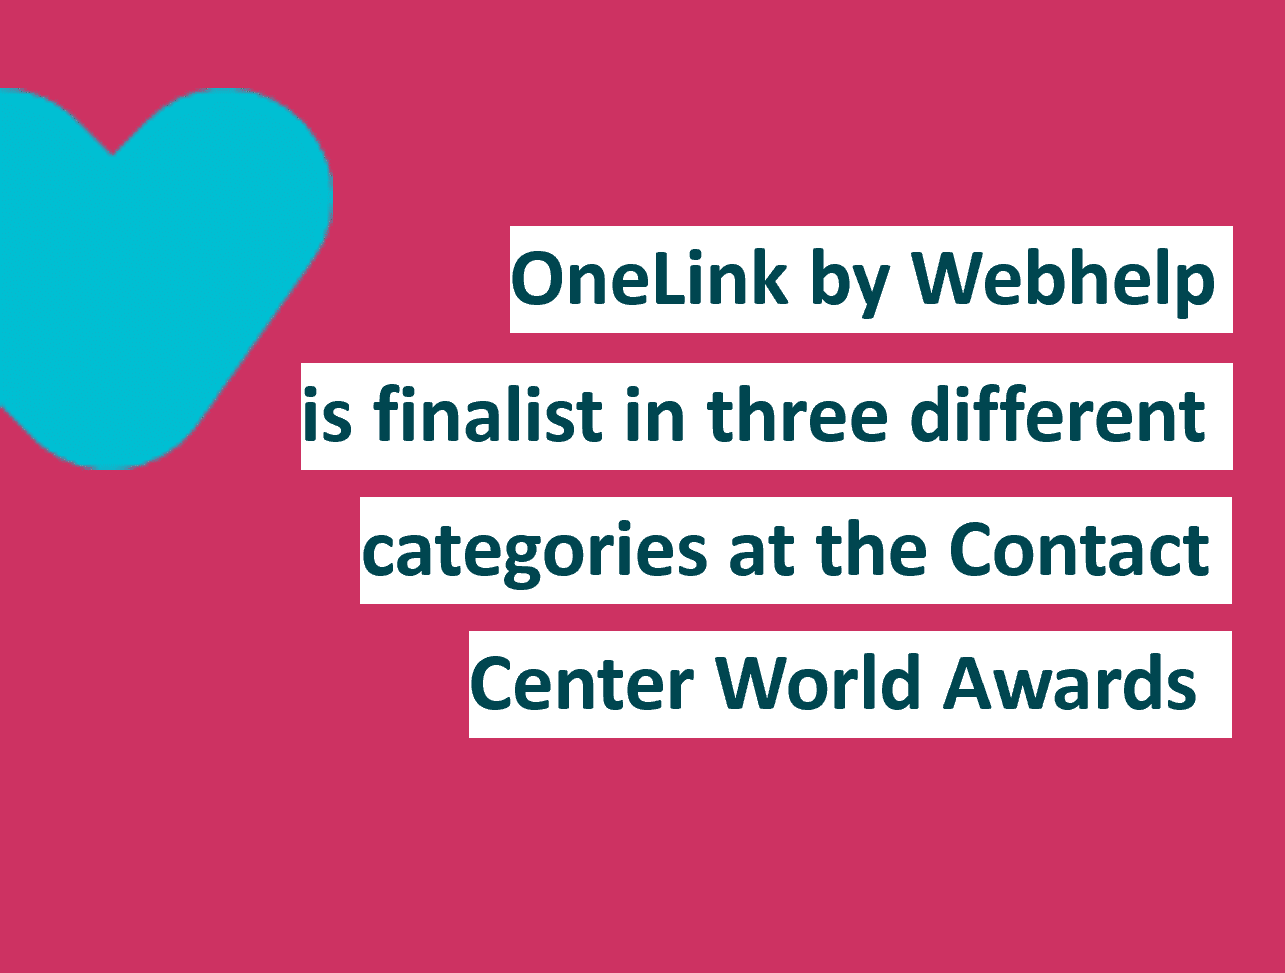 OneLink is finalist in three different categories at the 16th Annual 2021 Contact Center World Awards